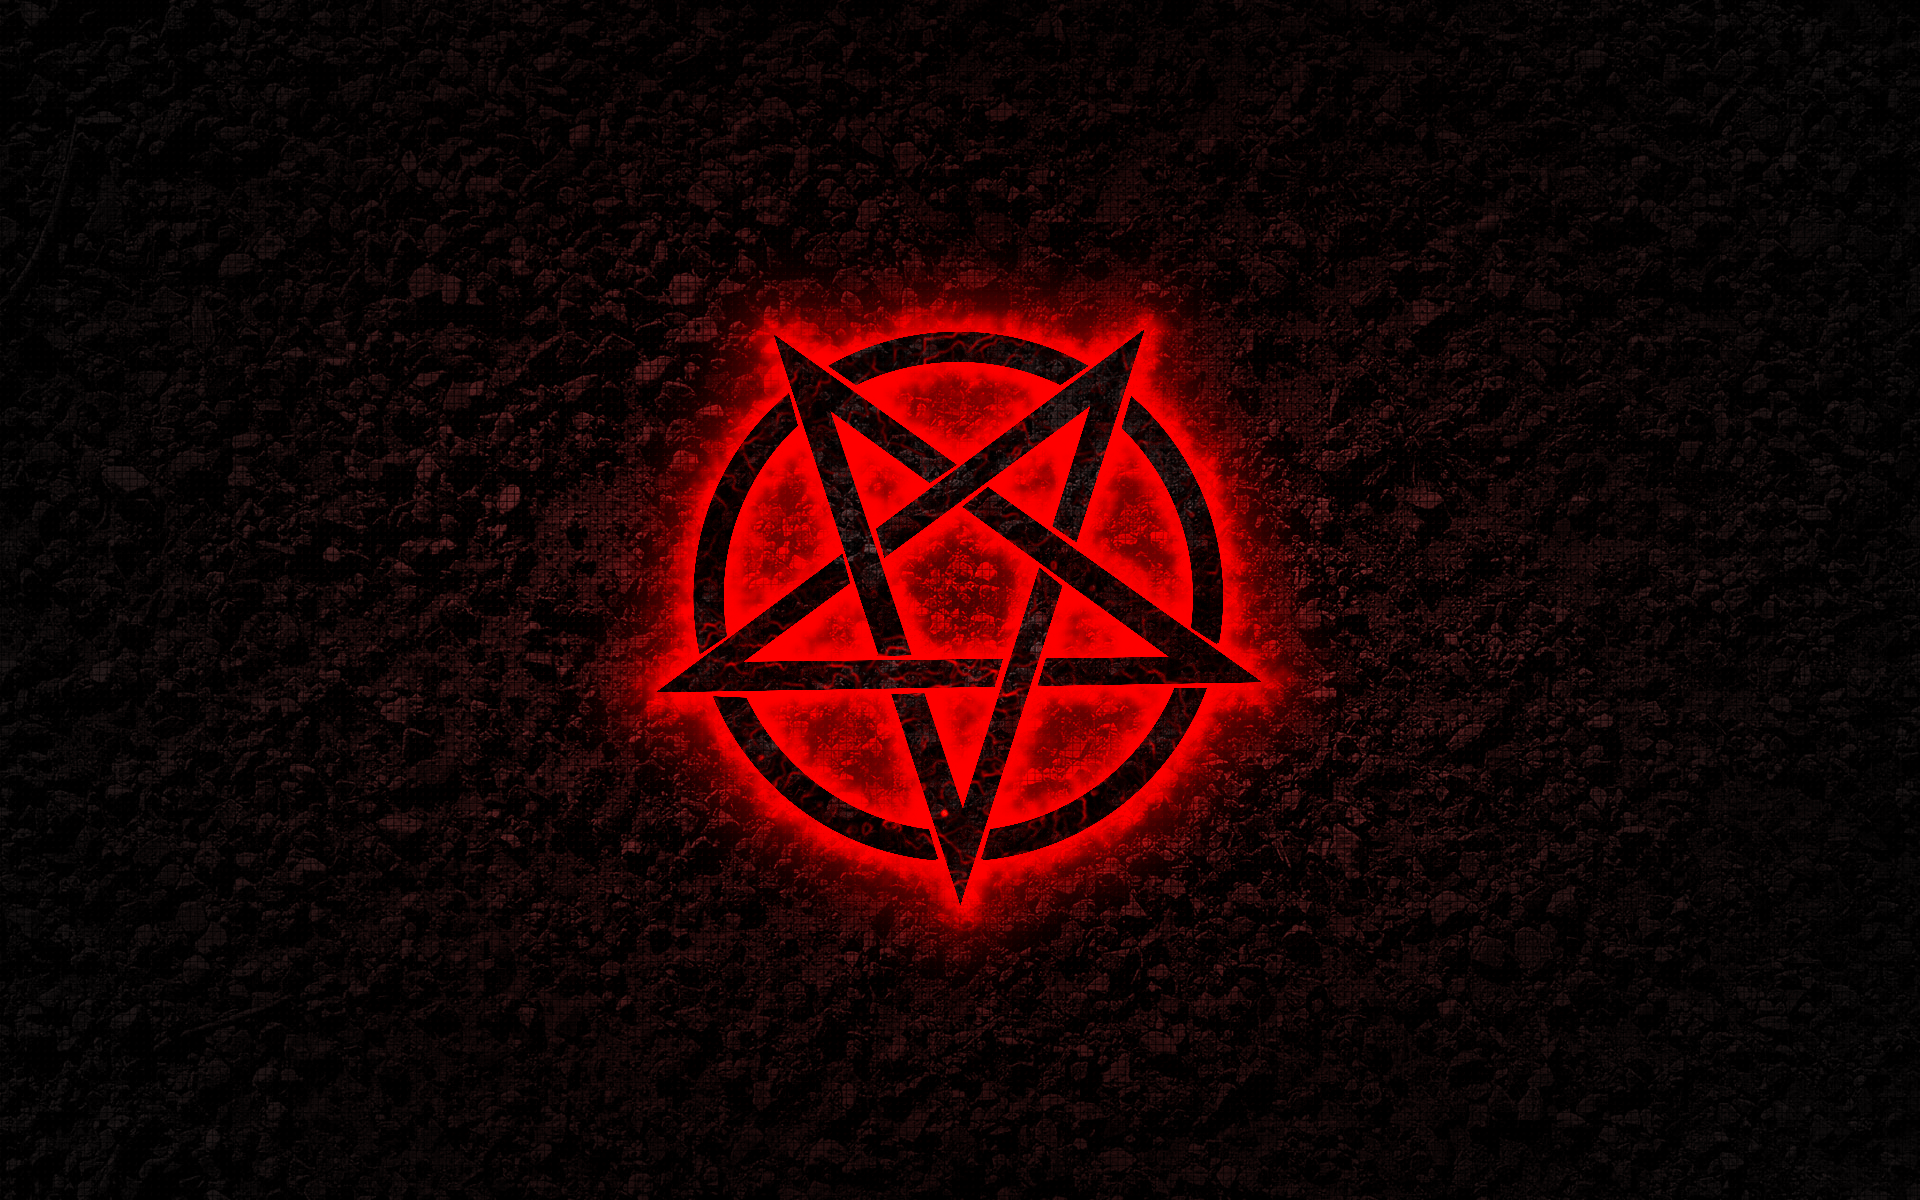 After seeing a Brimstone wallpaper, i tried my hands at an Abaddon